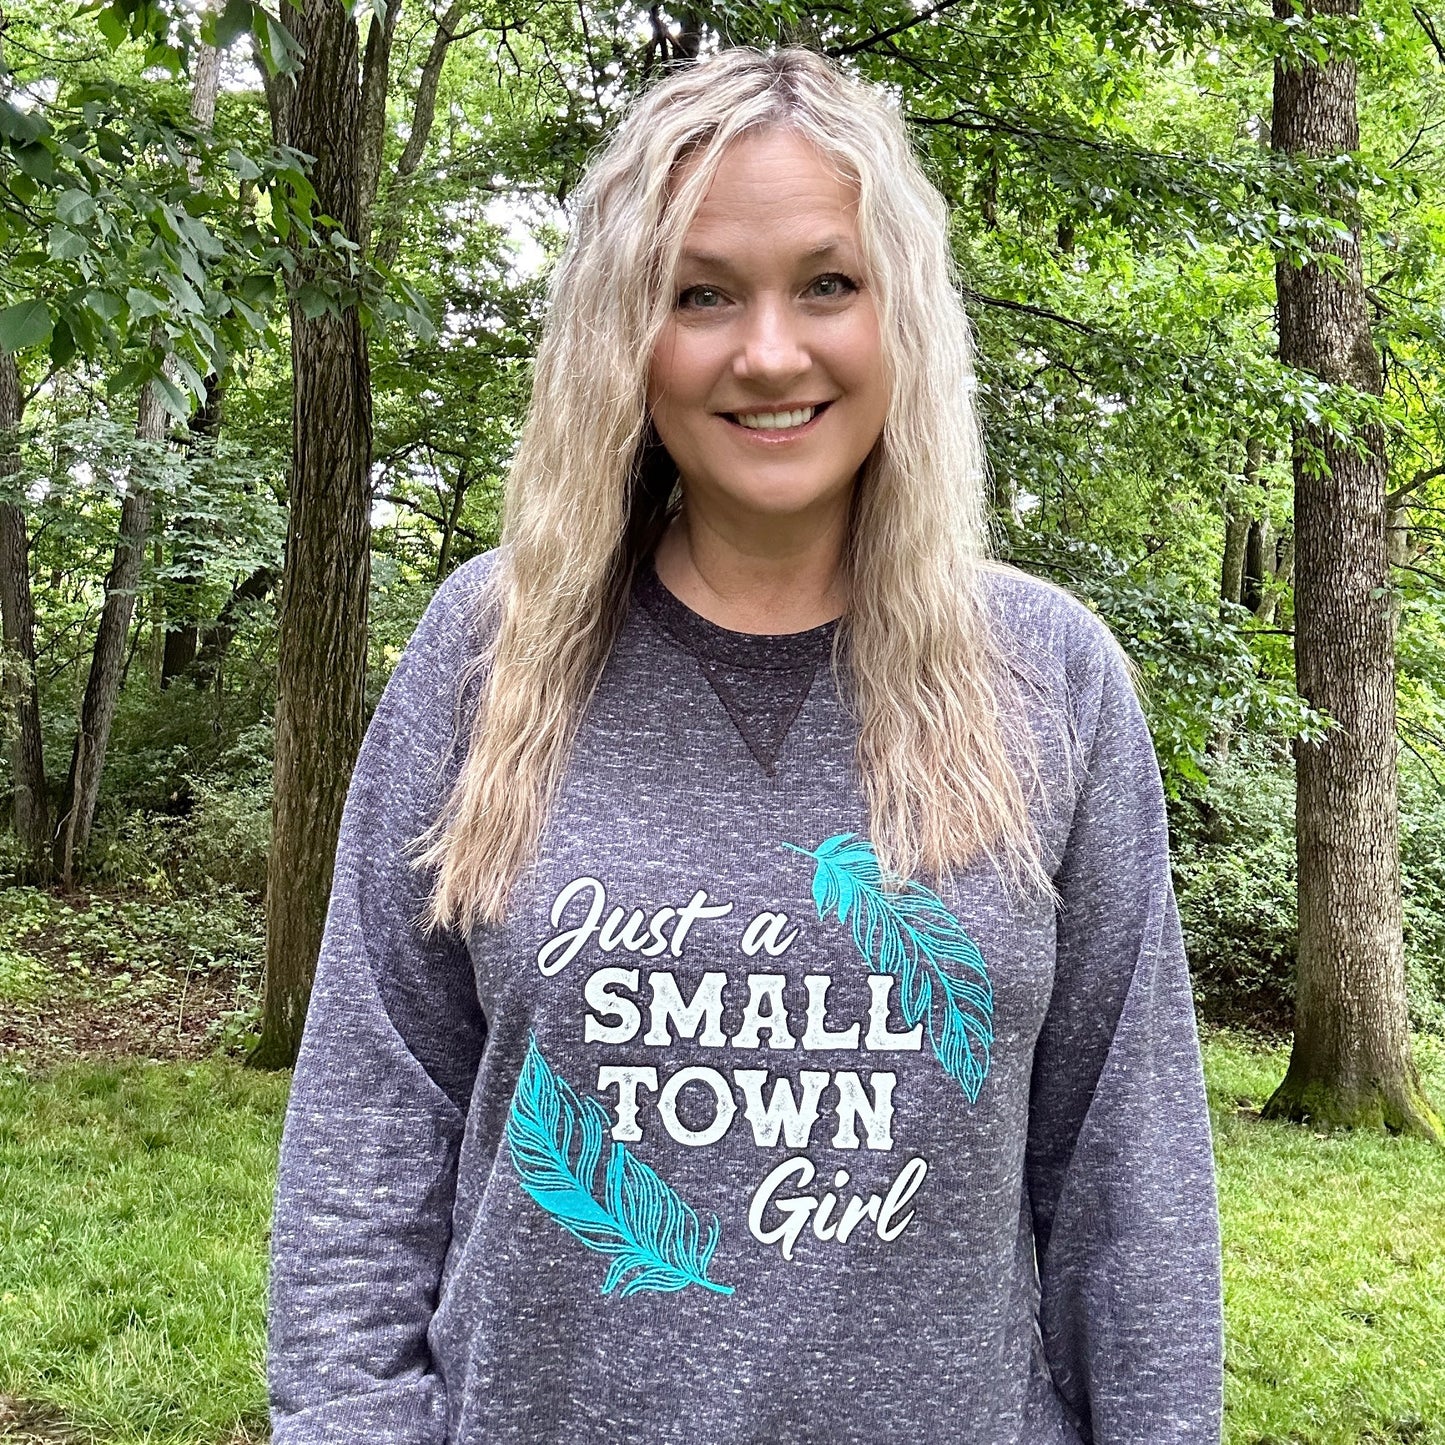 Just a Small Town Girl Sweatshirt Plus Size Clothing Available Cute Cozy  Sweatshirt for Women 